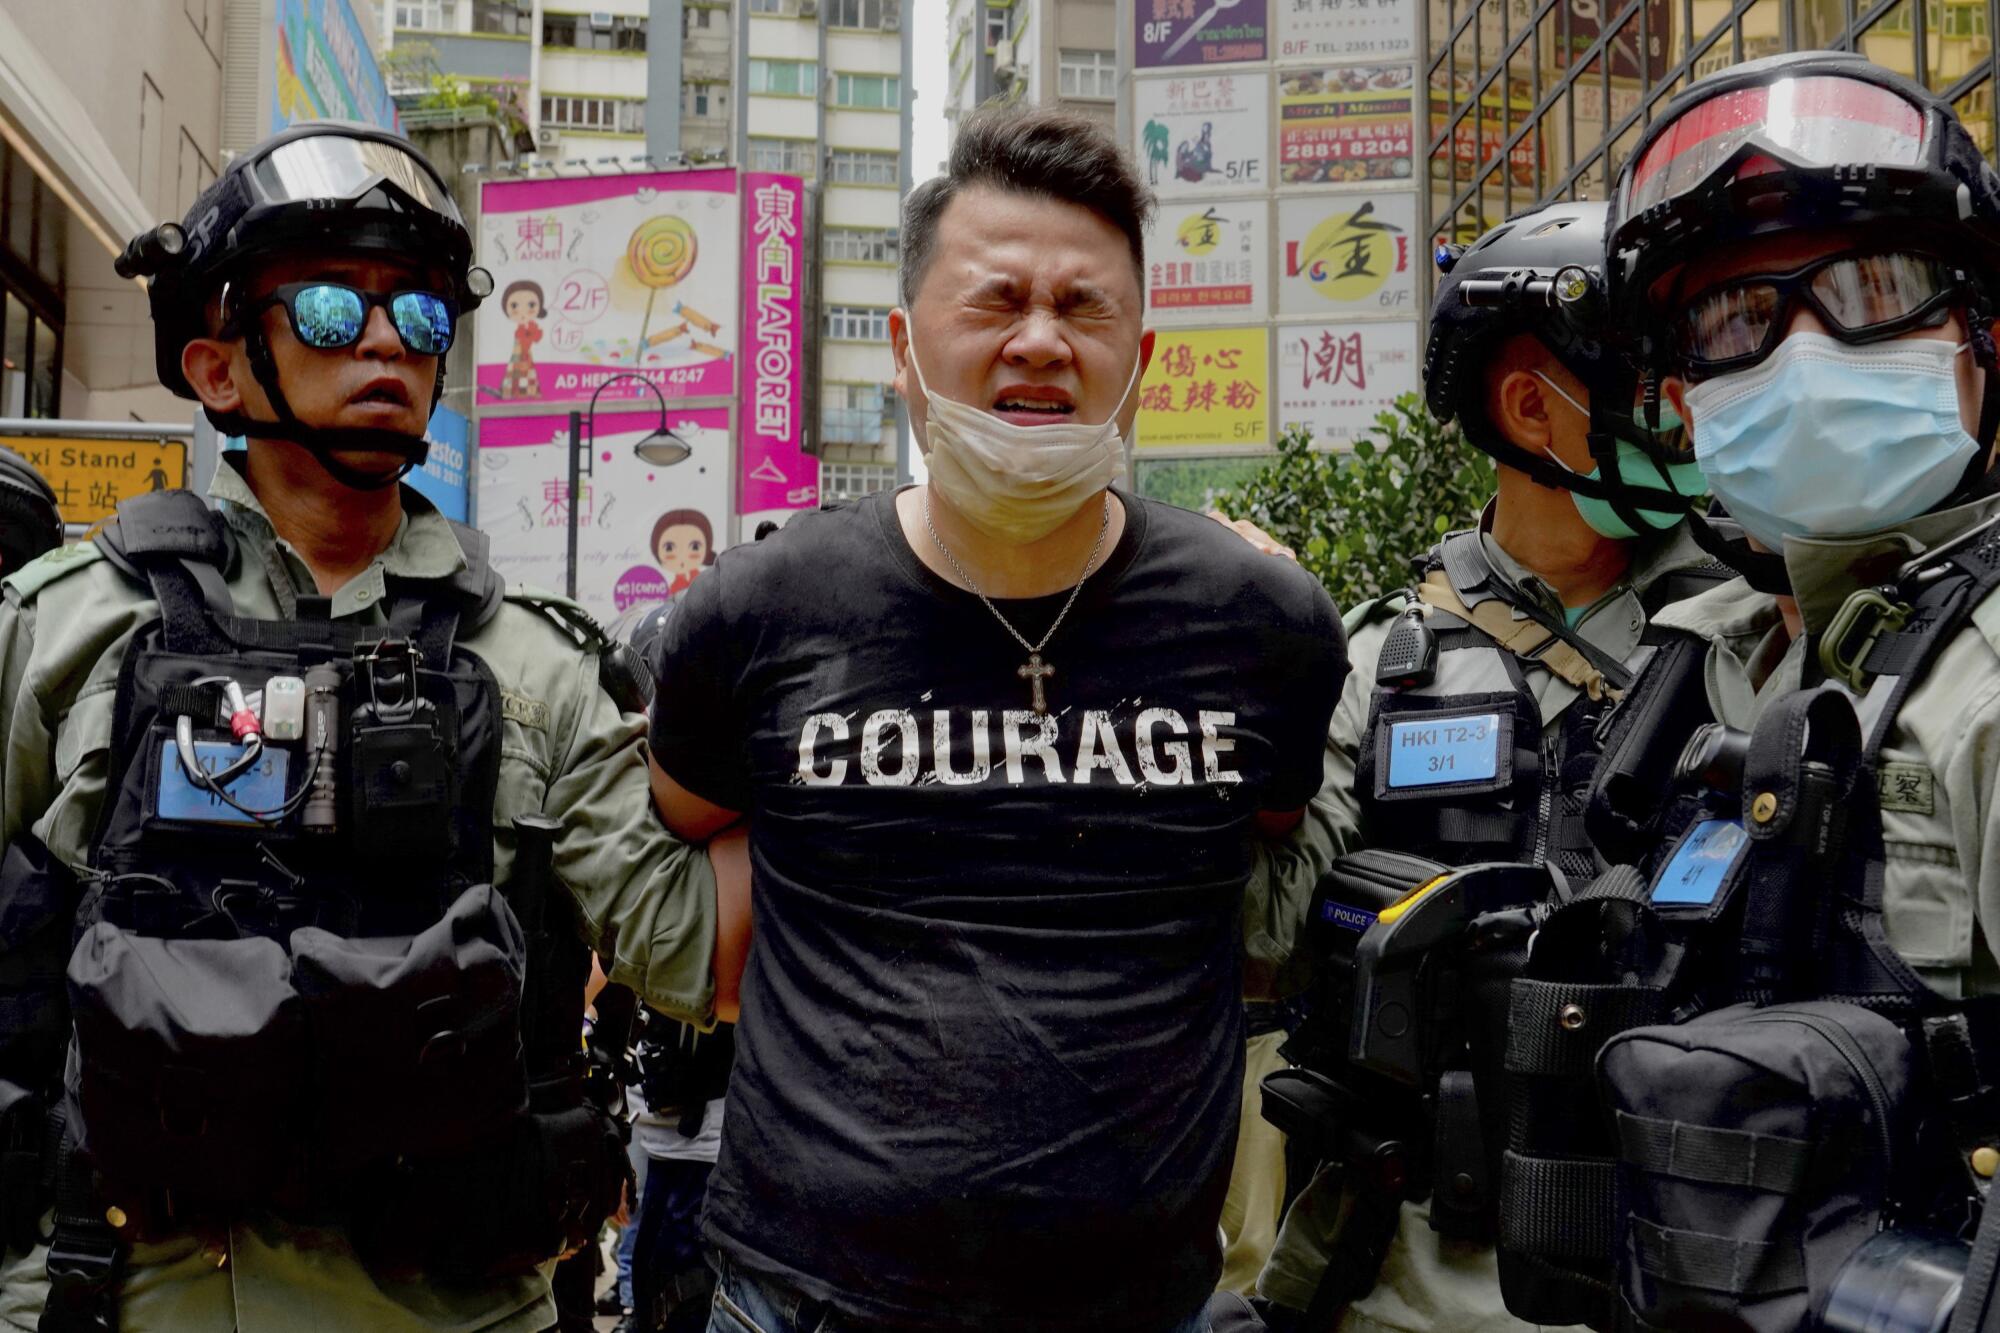 Police detain a protester in Causeway Bay.